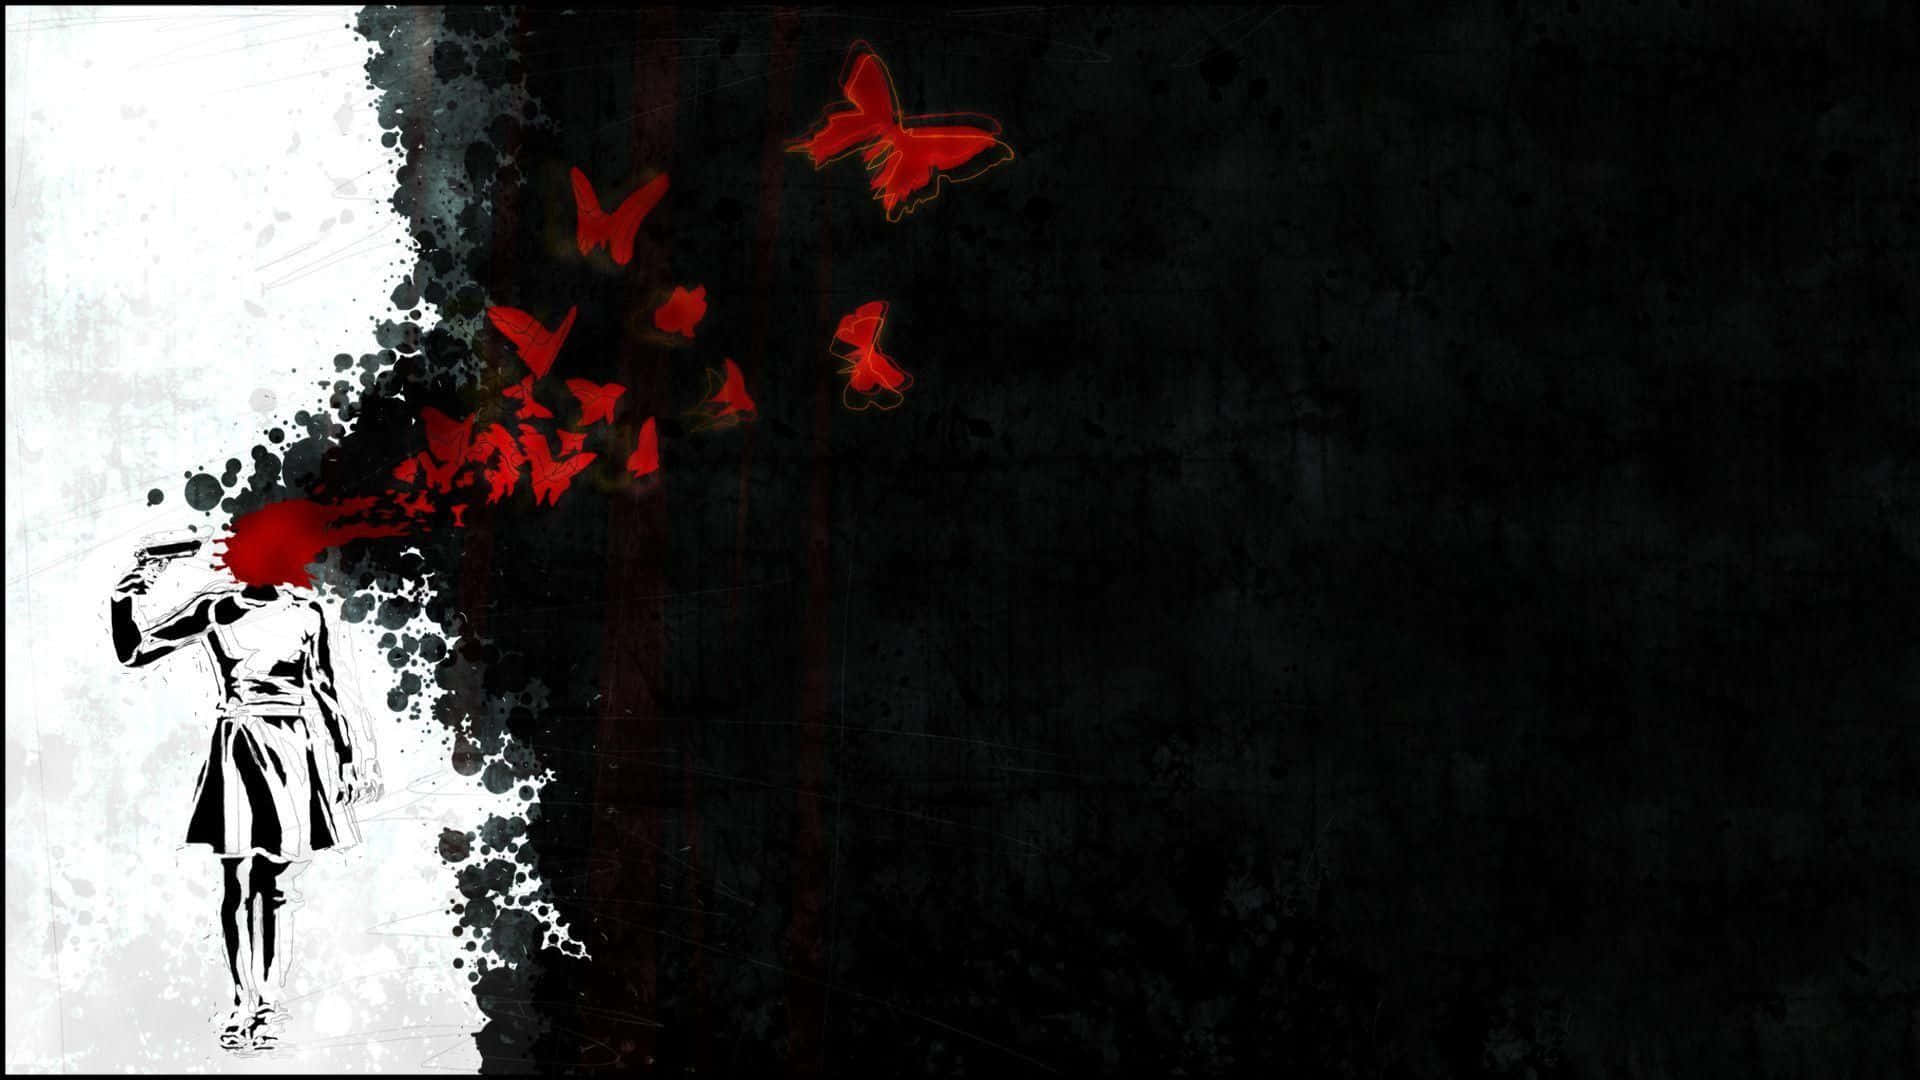 Enjoy the dark, mysterious world of Black and Red Anime Wallpaper